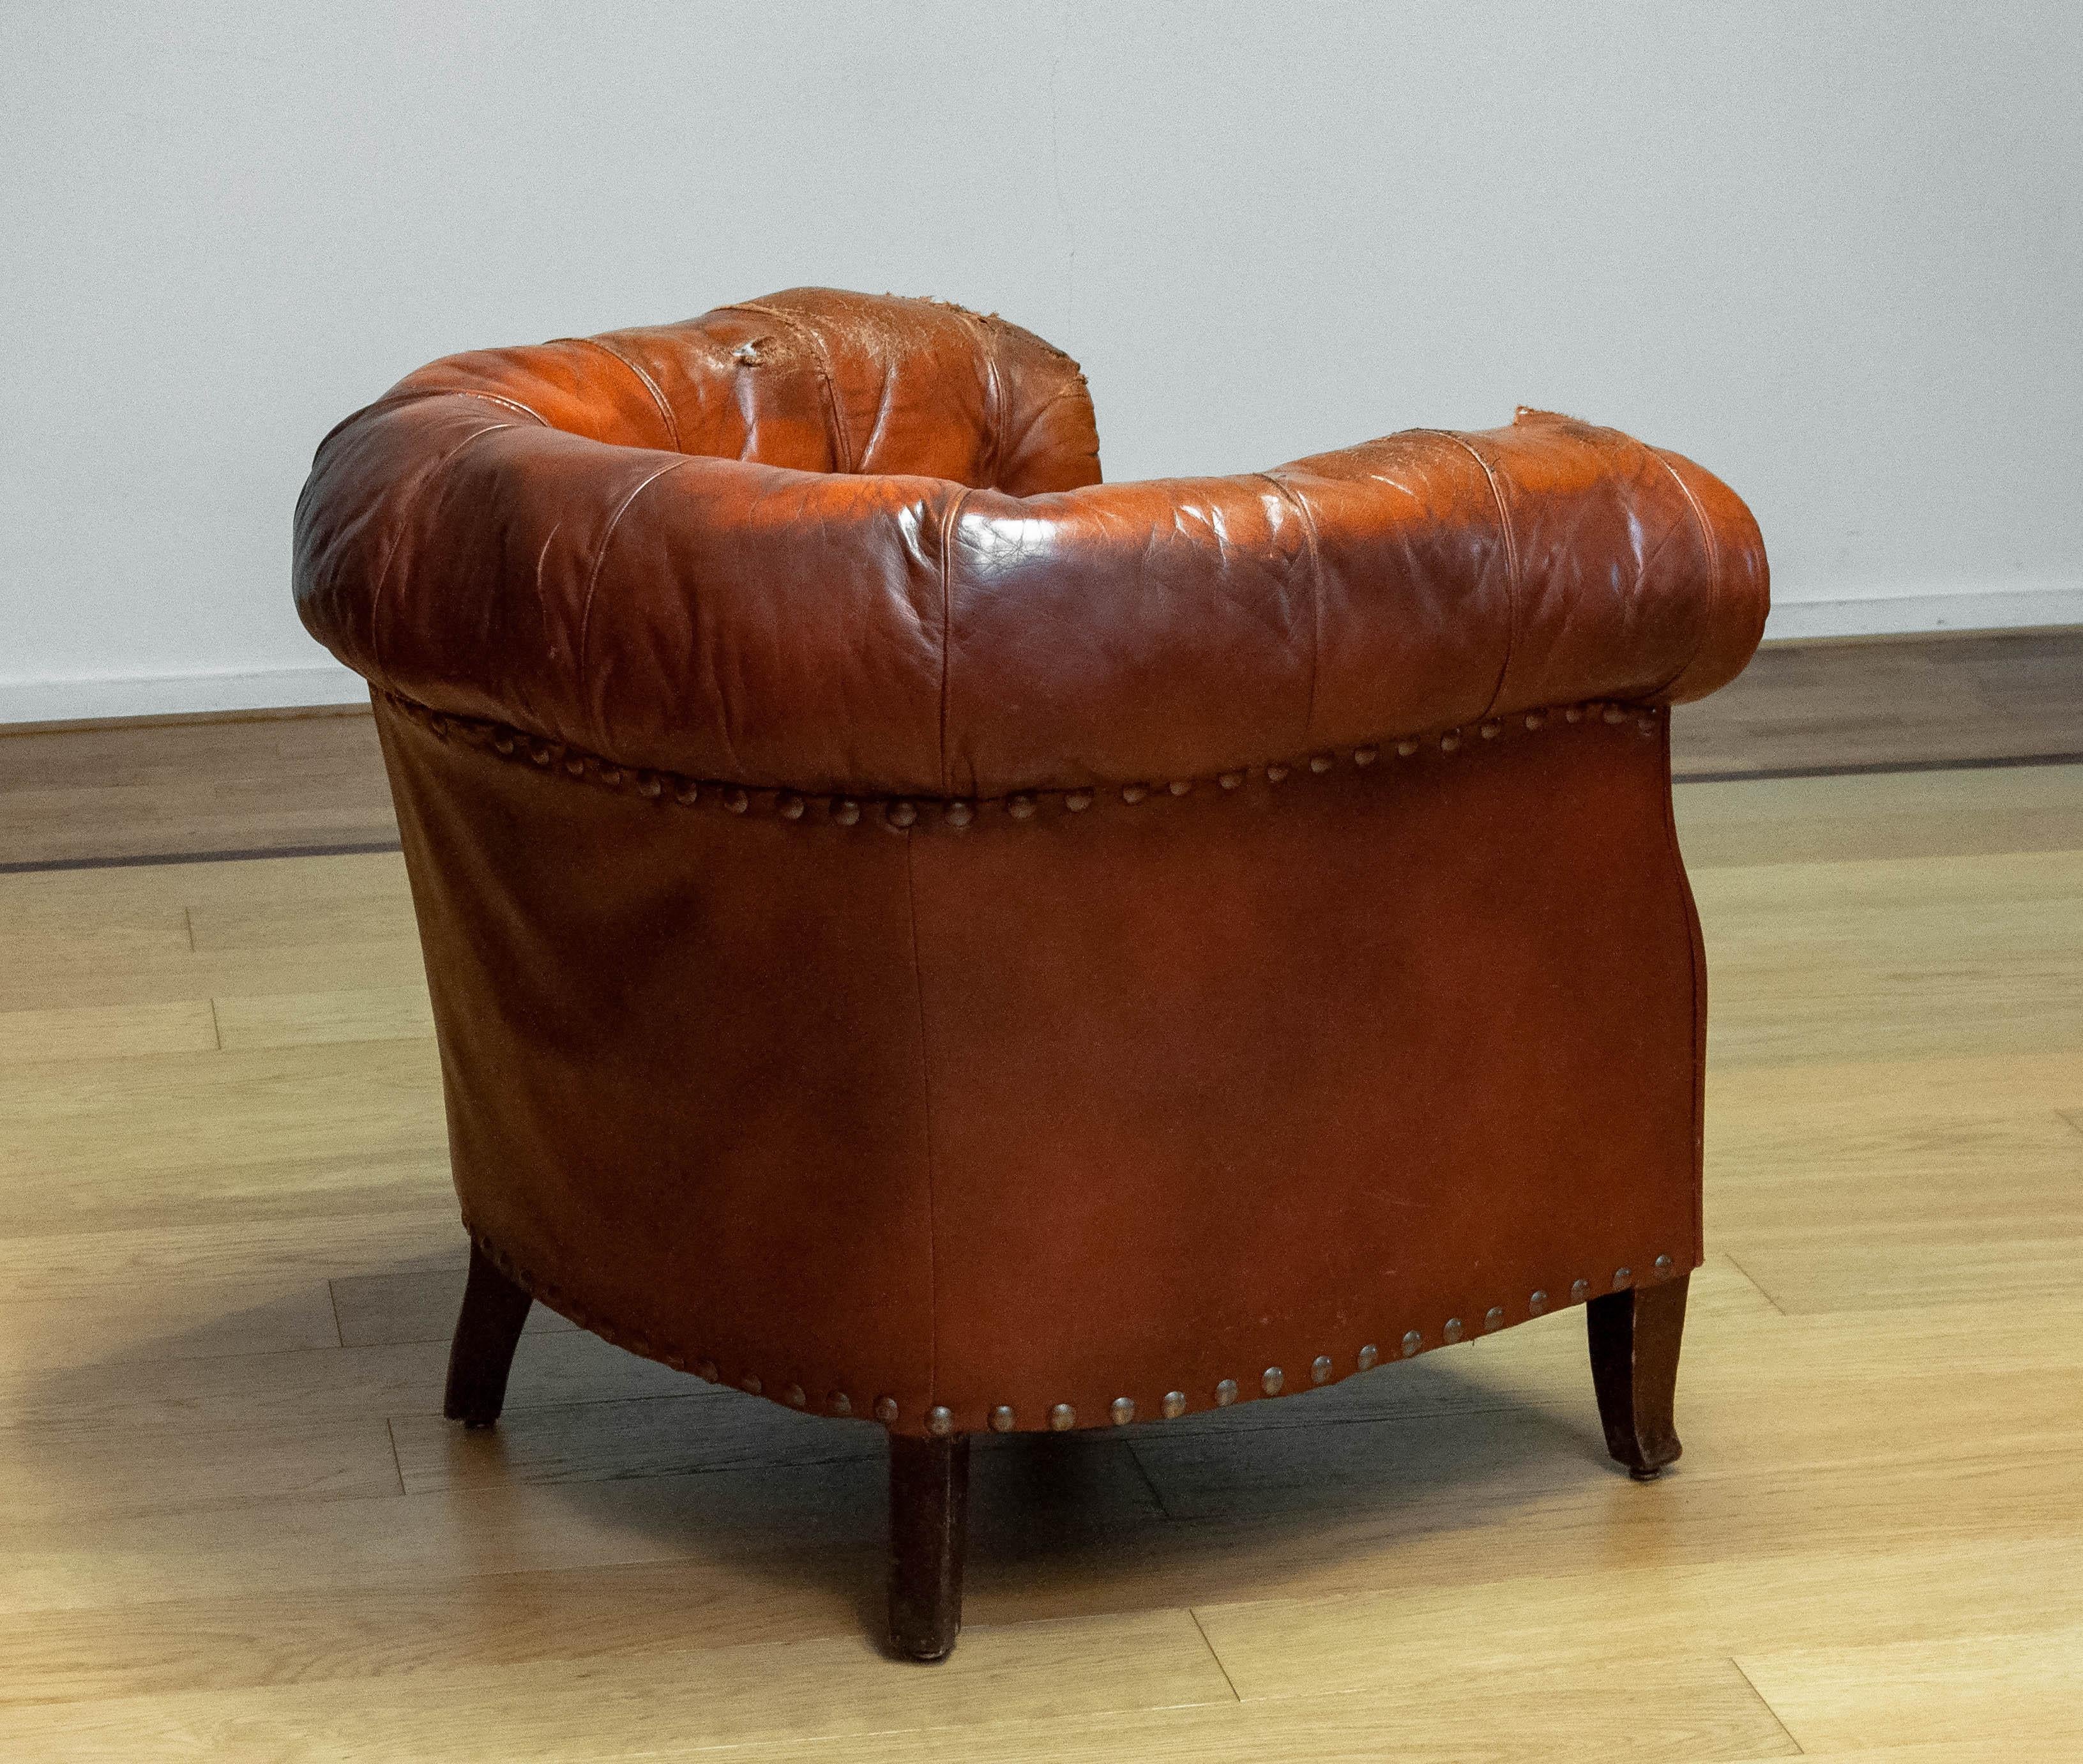 1940s Swedish Tufted Club Chair 'Chesterfield Model' In Tan Brown Worn Leather 2